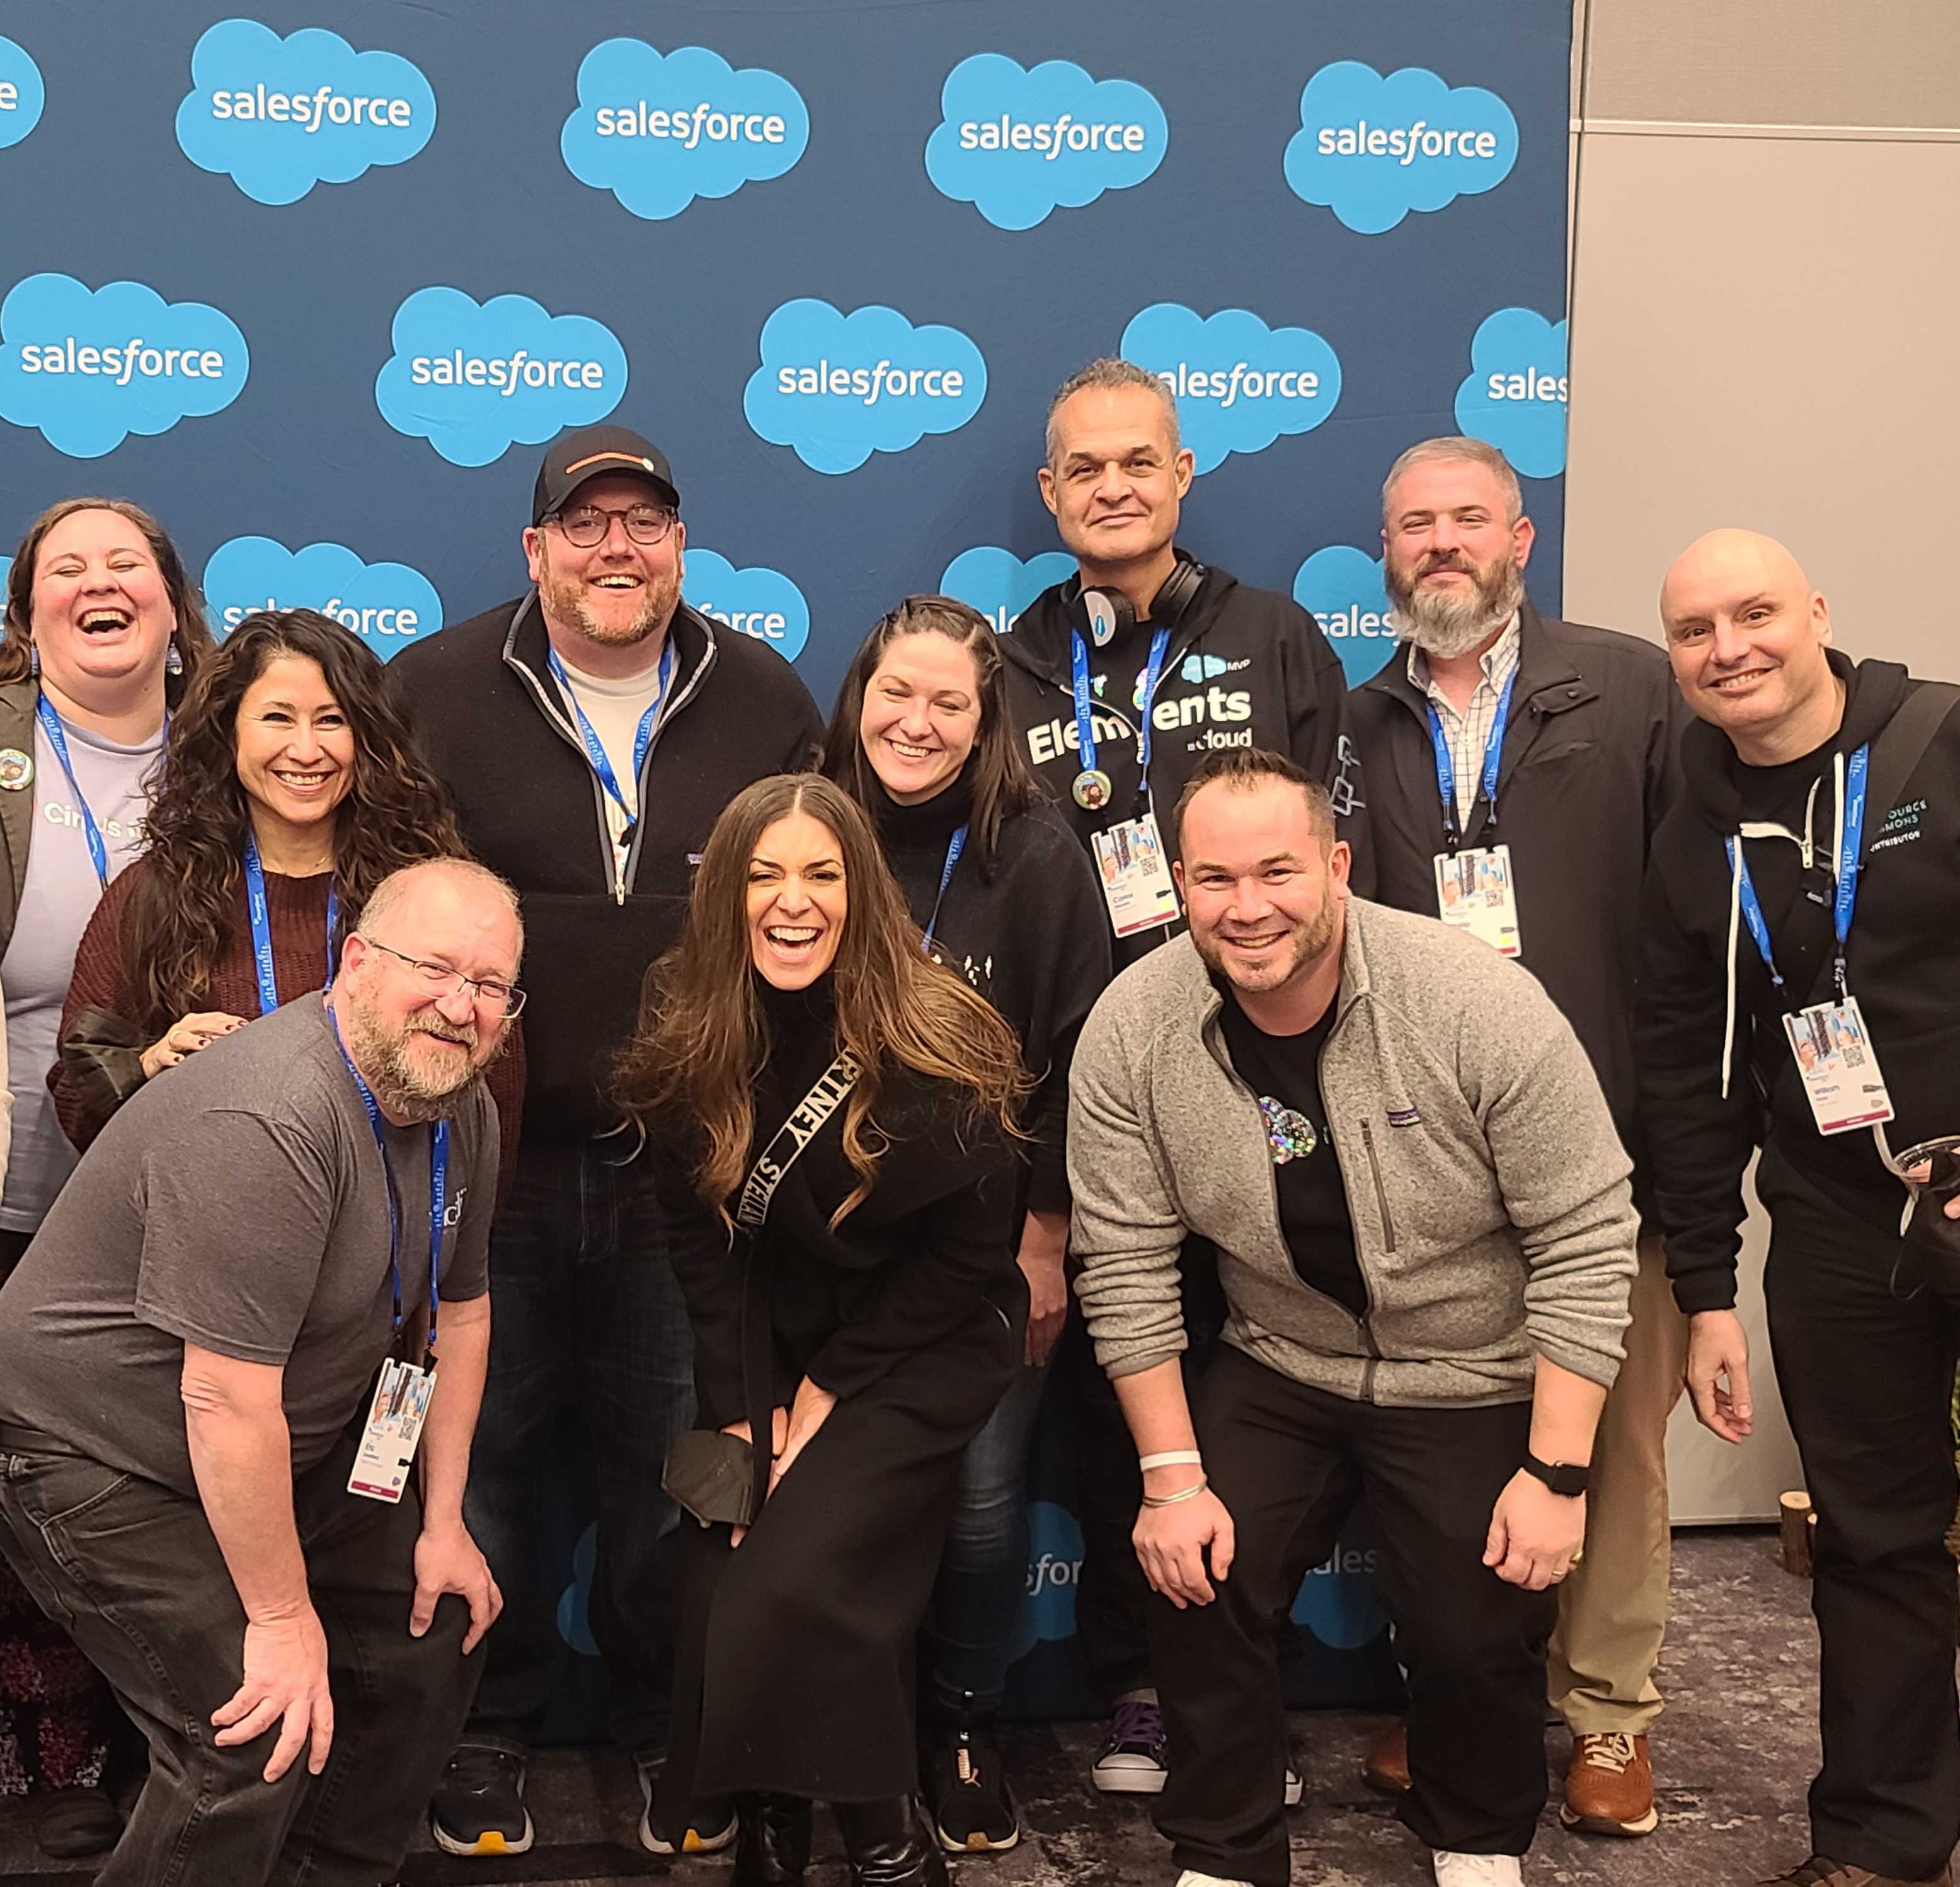 Salesforce CMO Sarah Franklin Happy Hour with Salesforce MVPs Tigh Loughhead, Eric Dreshfield, Carlos Siquiera, Stephanie Herrera, Phillip Southern and more